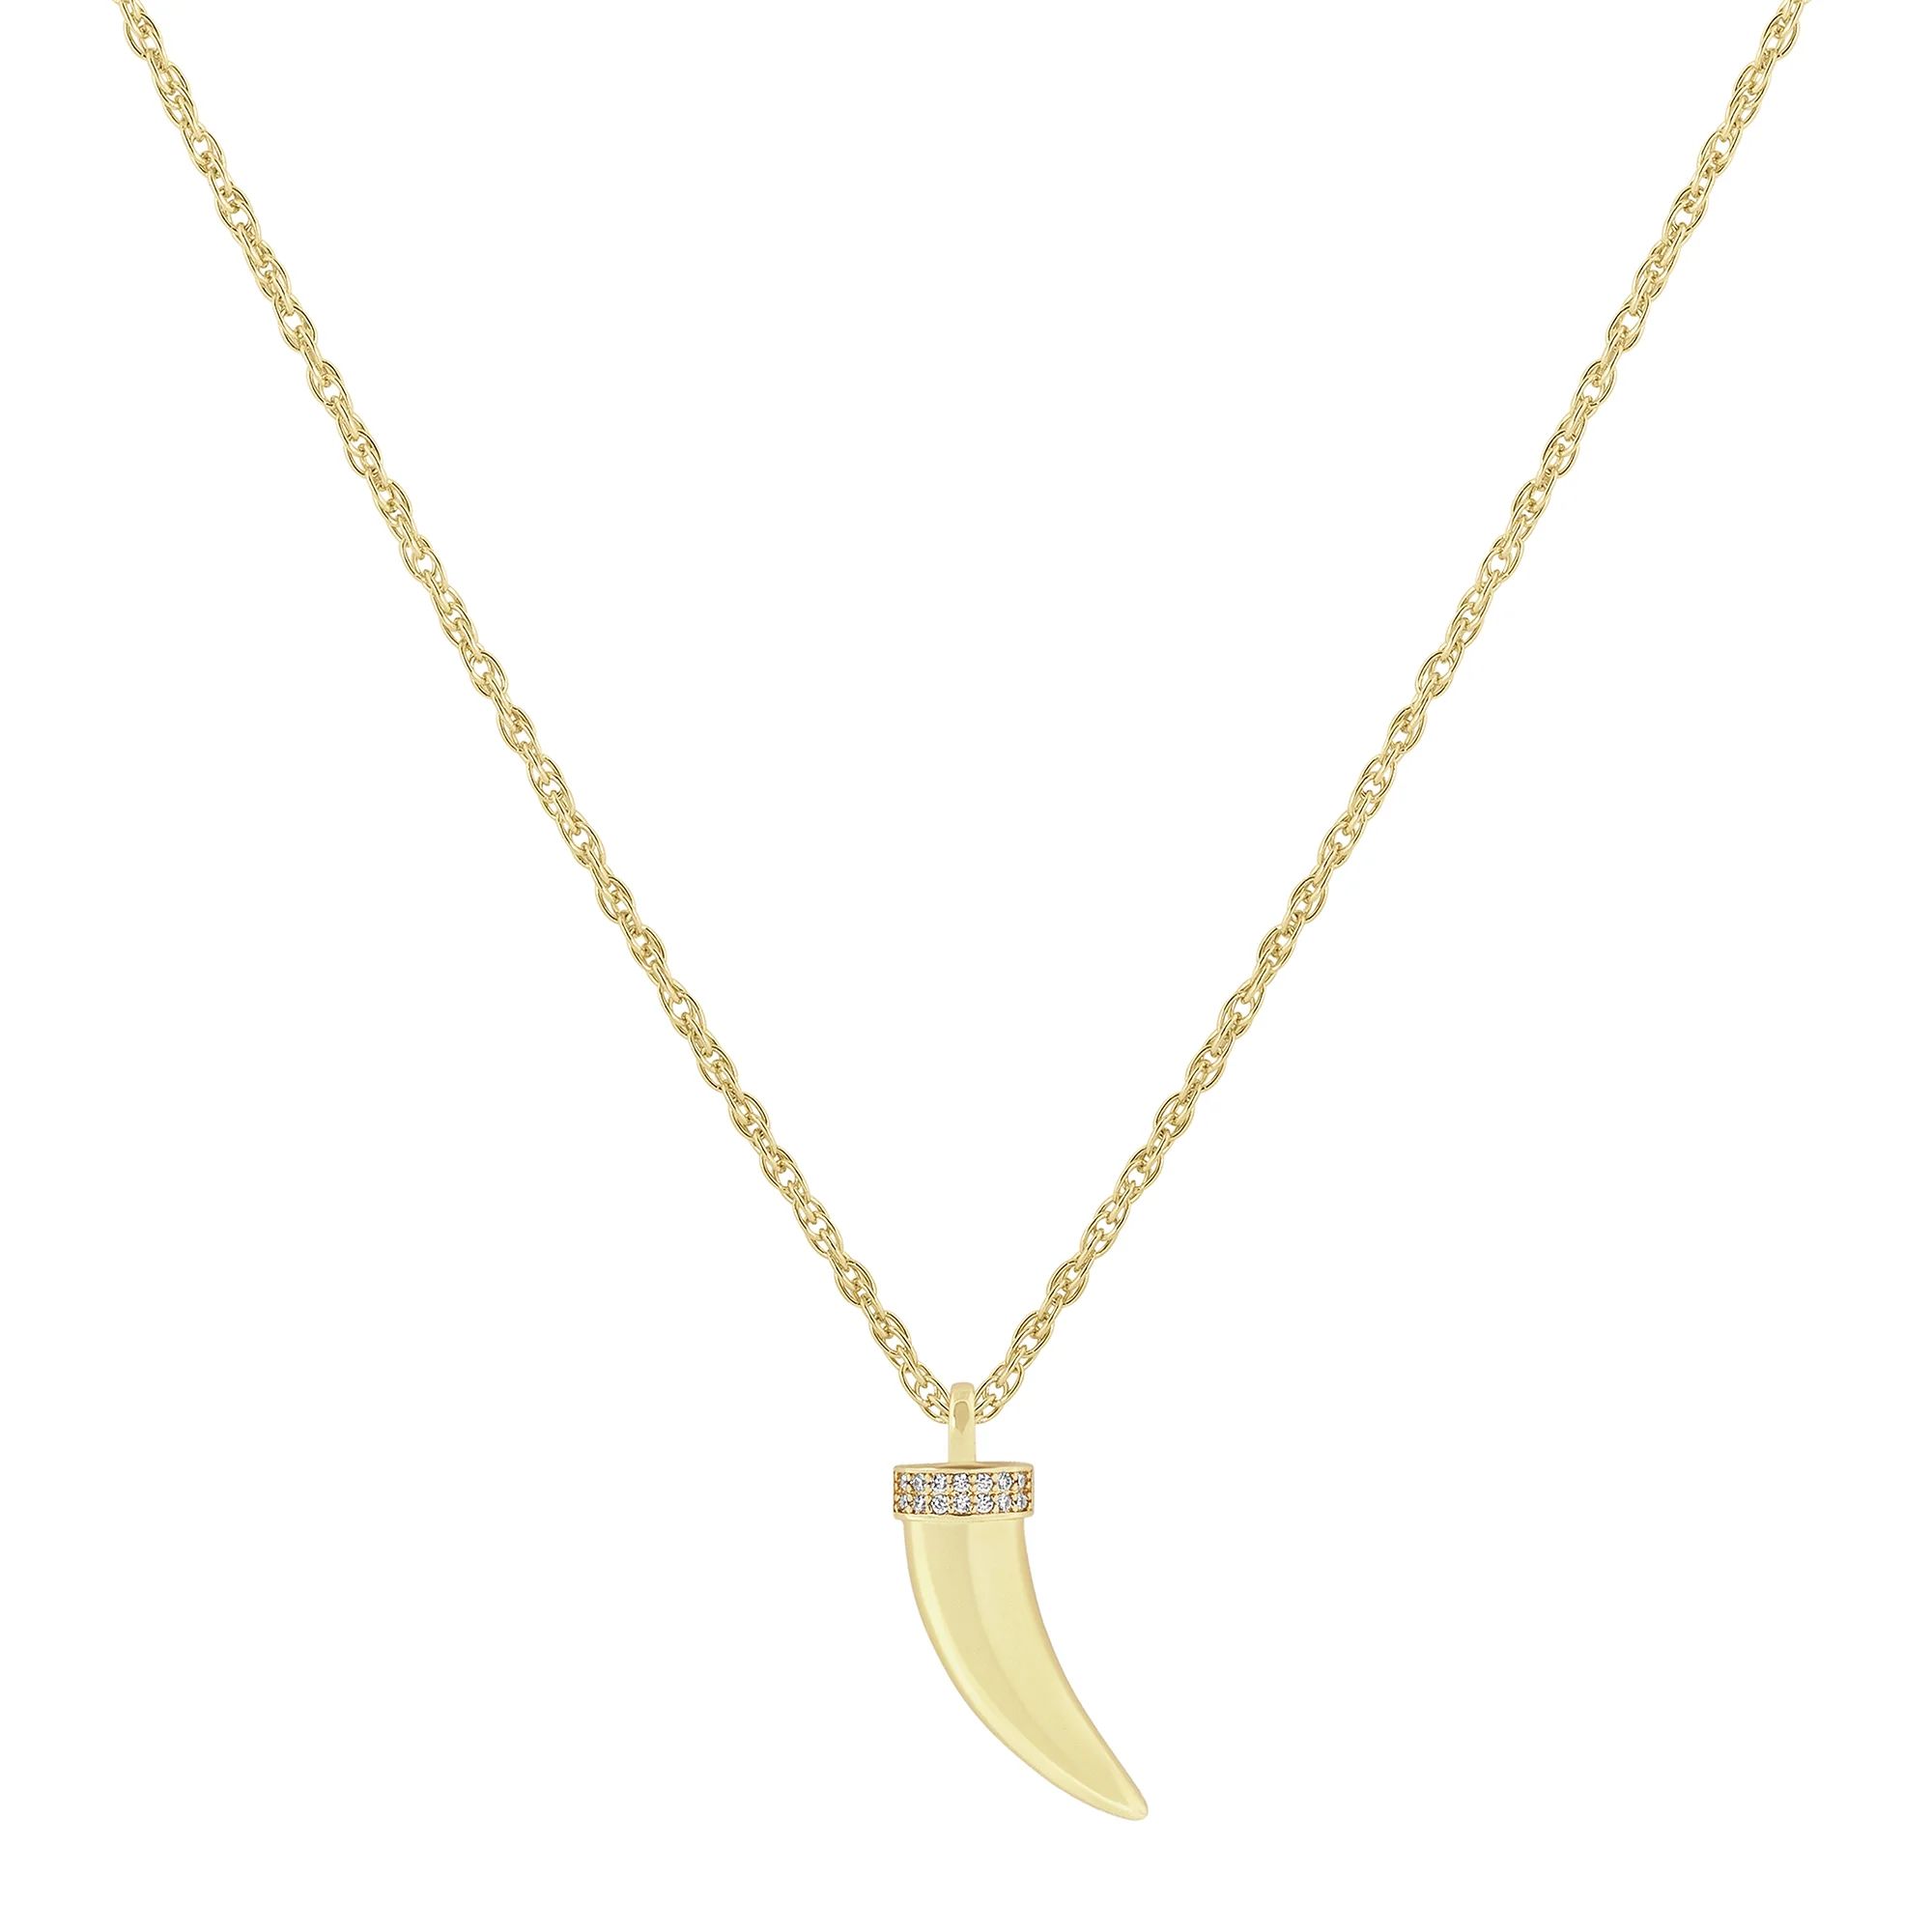 Horn Necklace | Electric Picks Jewelry